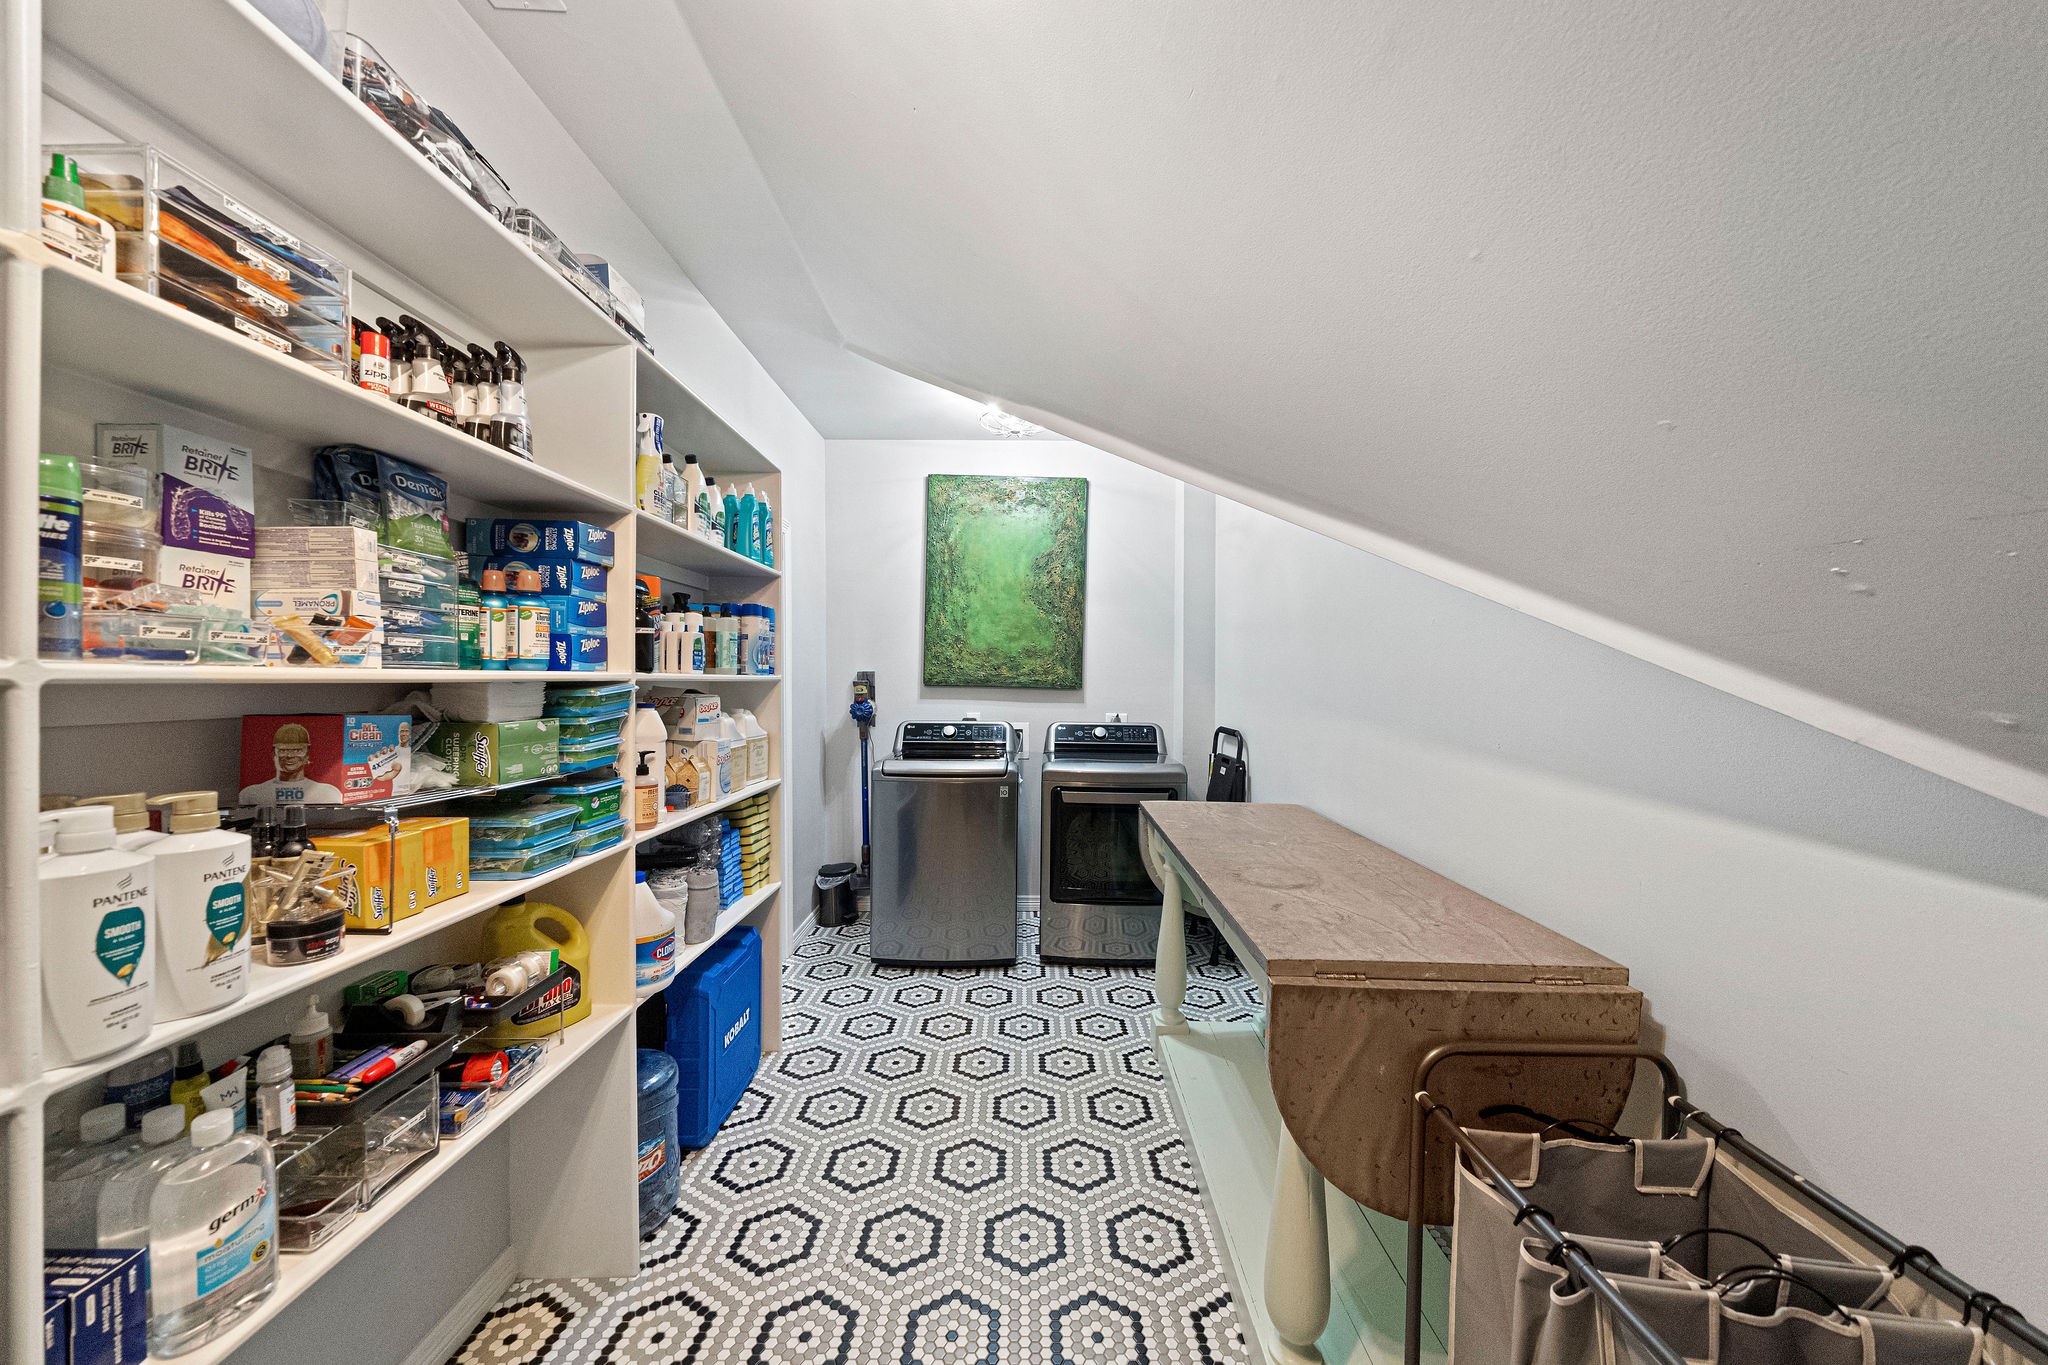 A second-floor utility room/pantry is located adjacent to the primary bedroom.